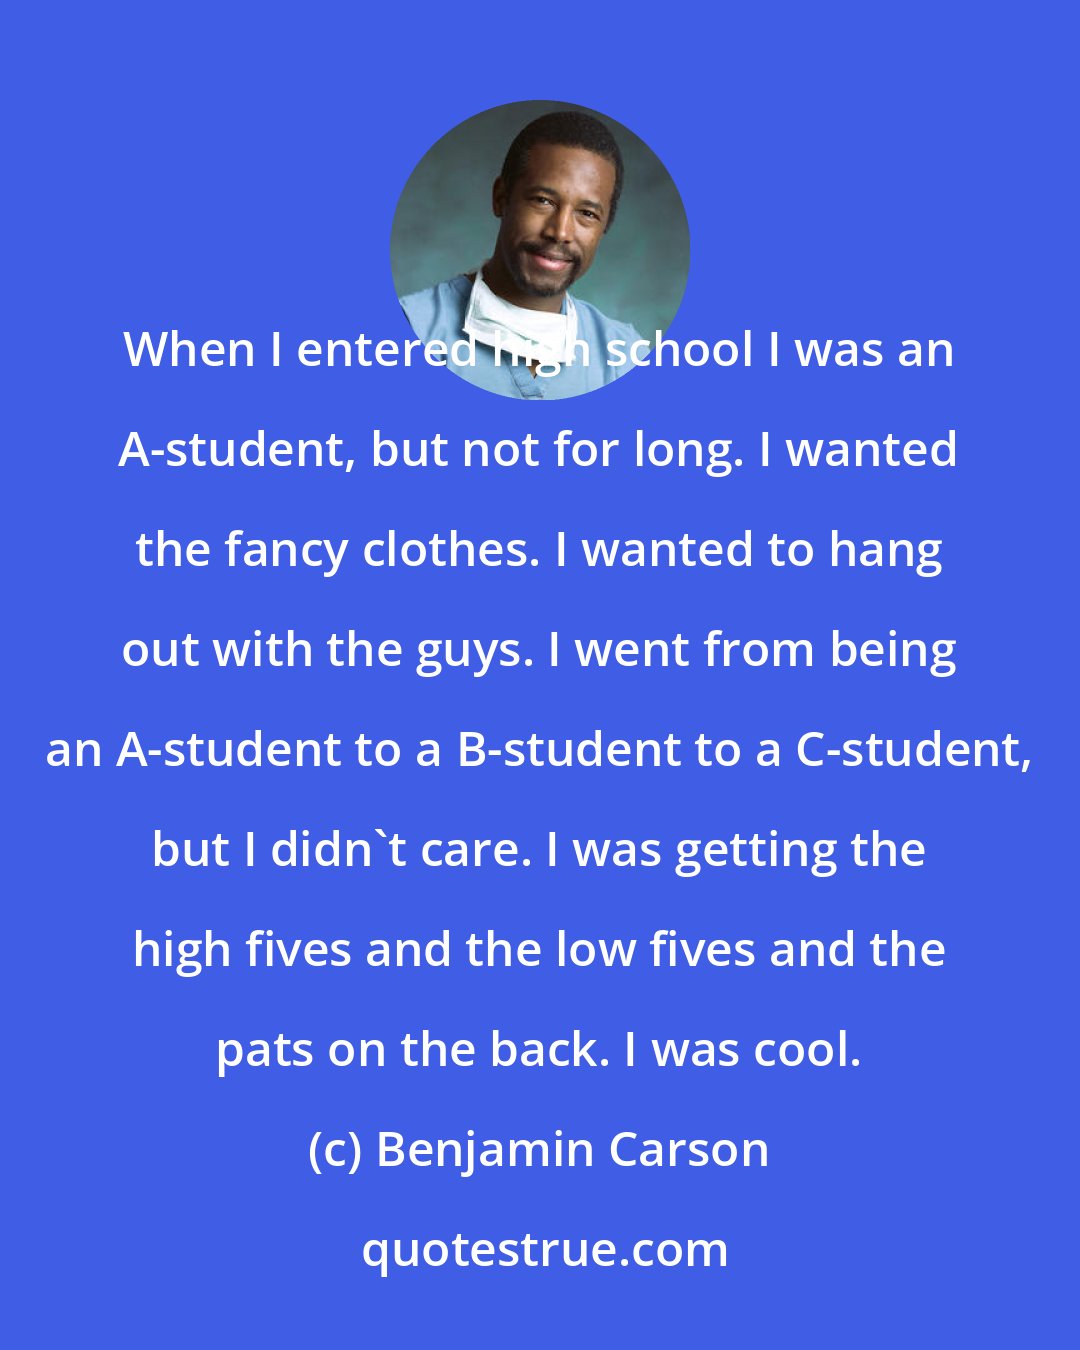 Benjamin Carson: When I entered high school I was an A-student, but not for long. I wanted the fancy clothes. I wanted to hang out with the guys. I went from being an A-student to a B-student to a C-student, but I didn't care. I was getting the high fives and the low fives and the pats on the back. I was cool.